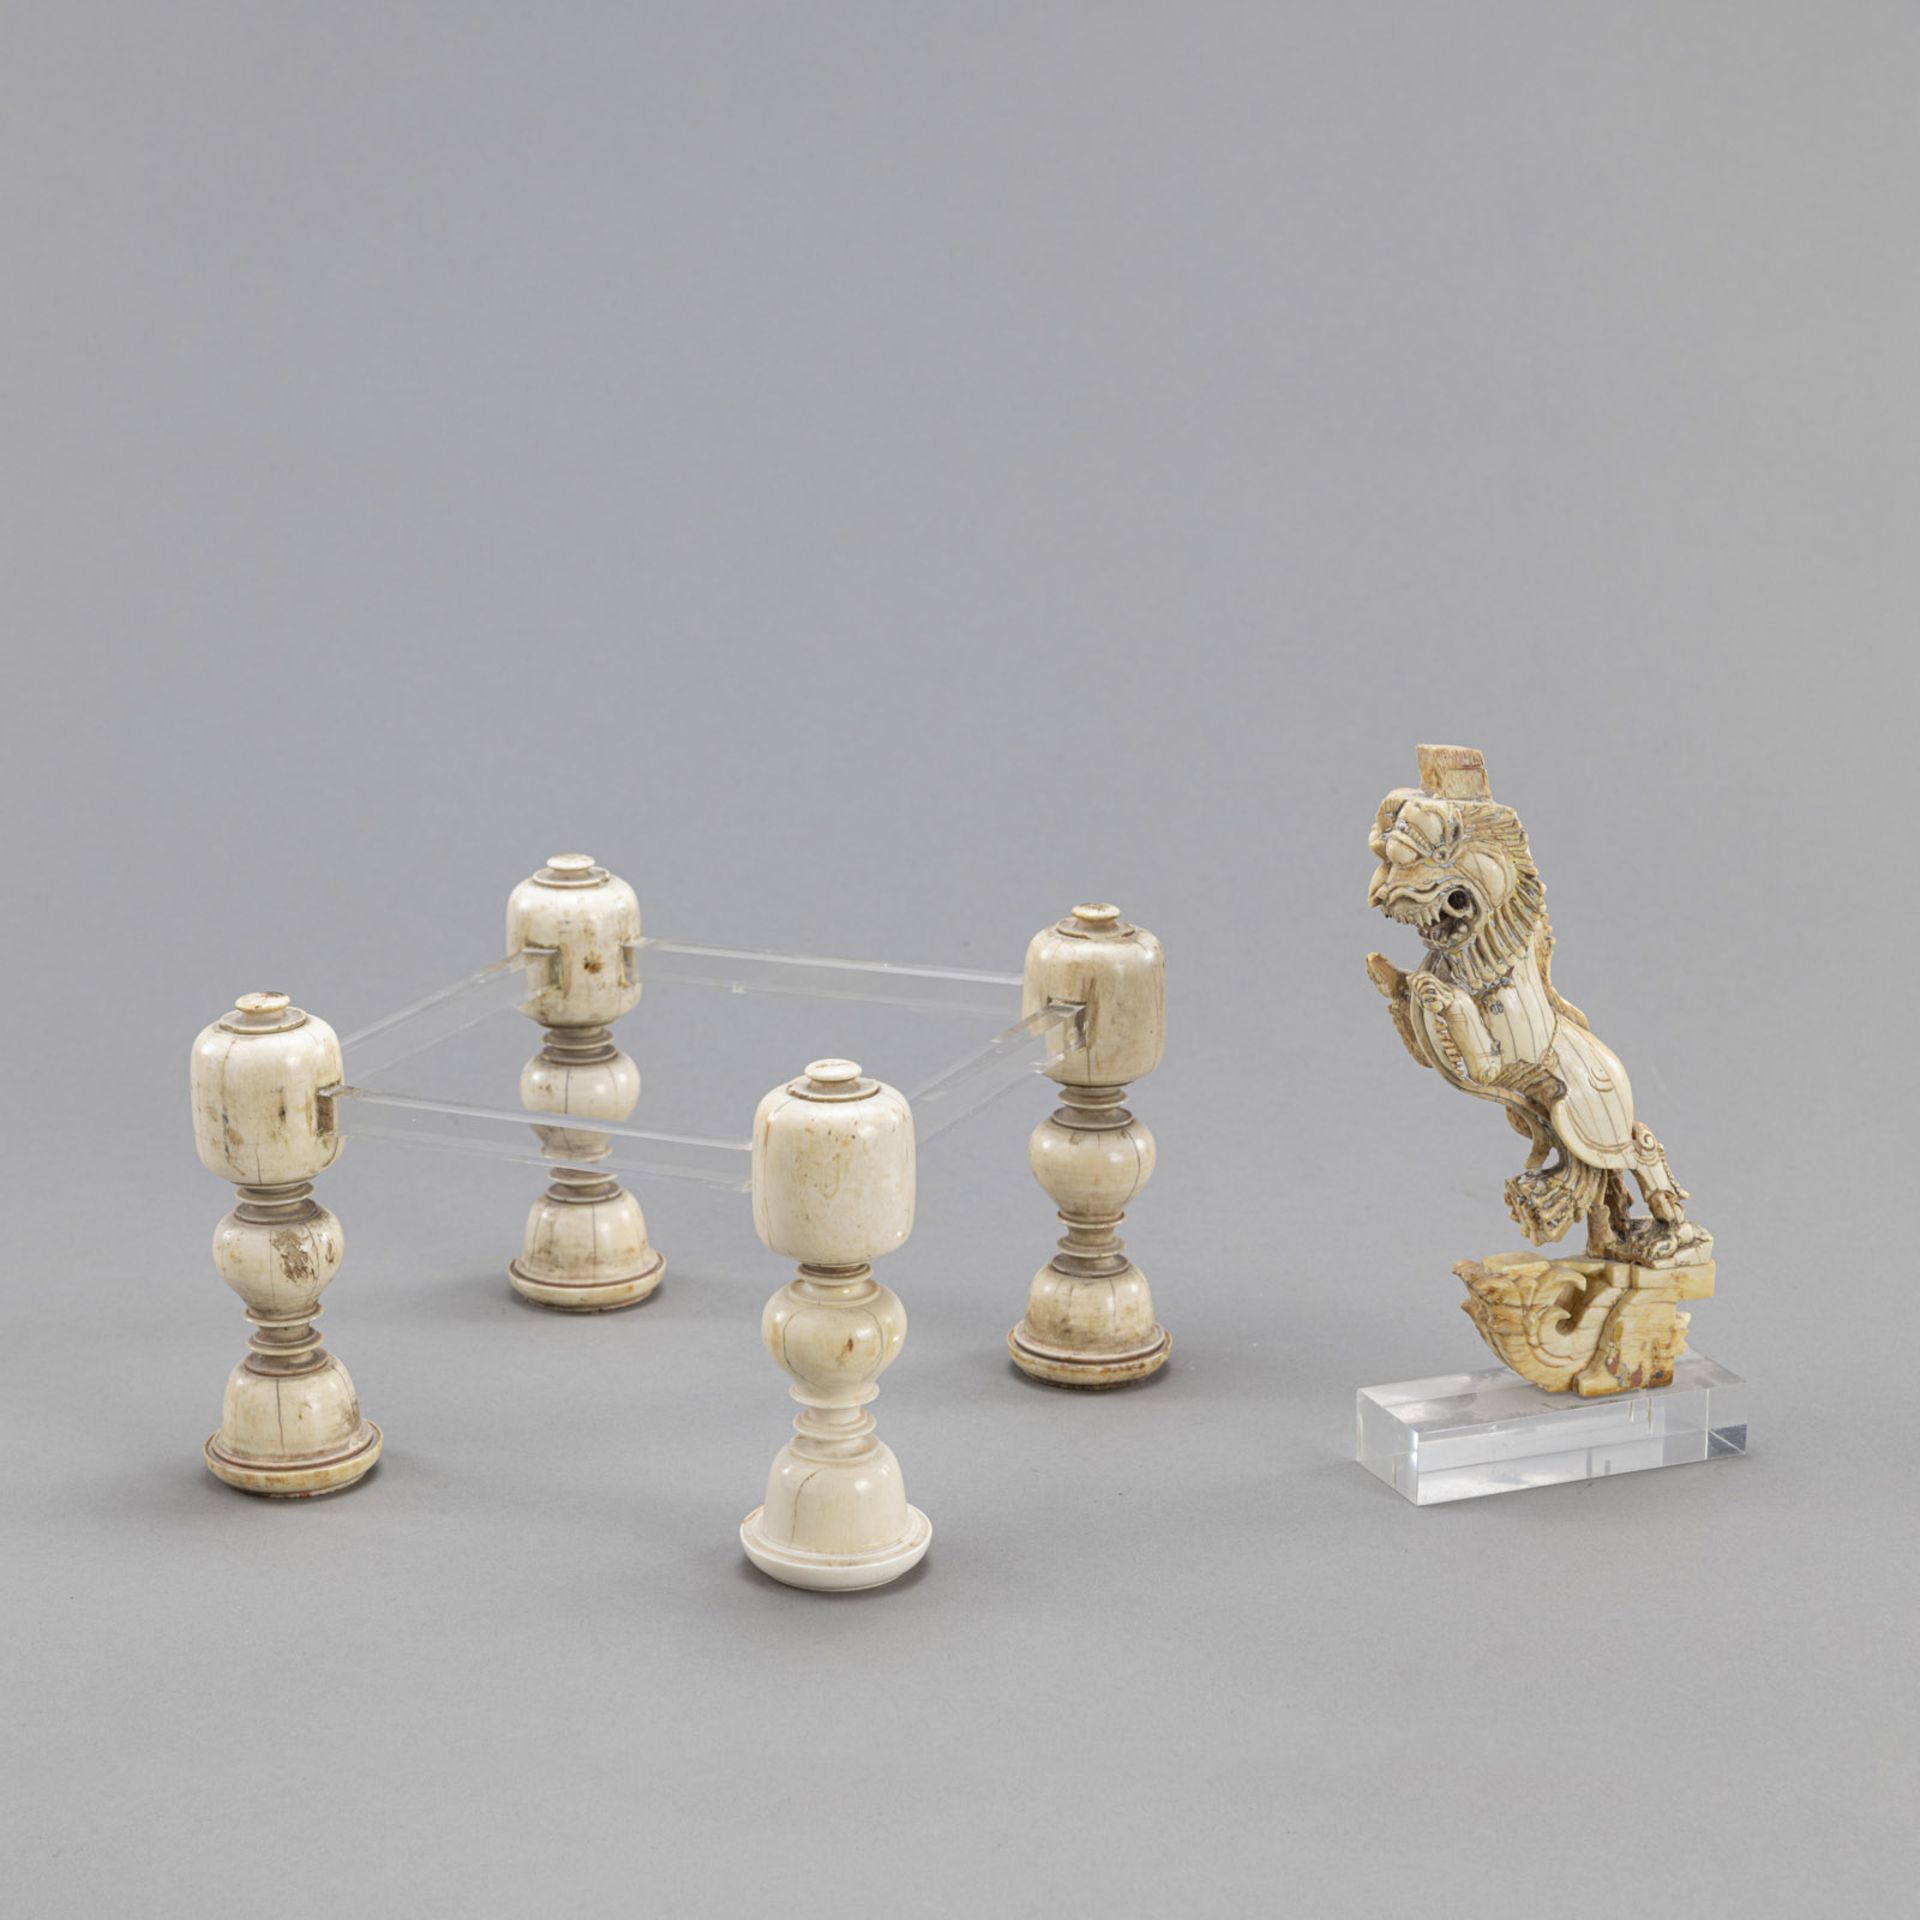 FOUR IVORY THRONE-LEGS AND AN IVORY FIGURE OF A VYALAKA